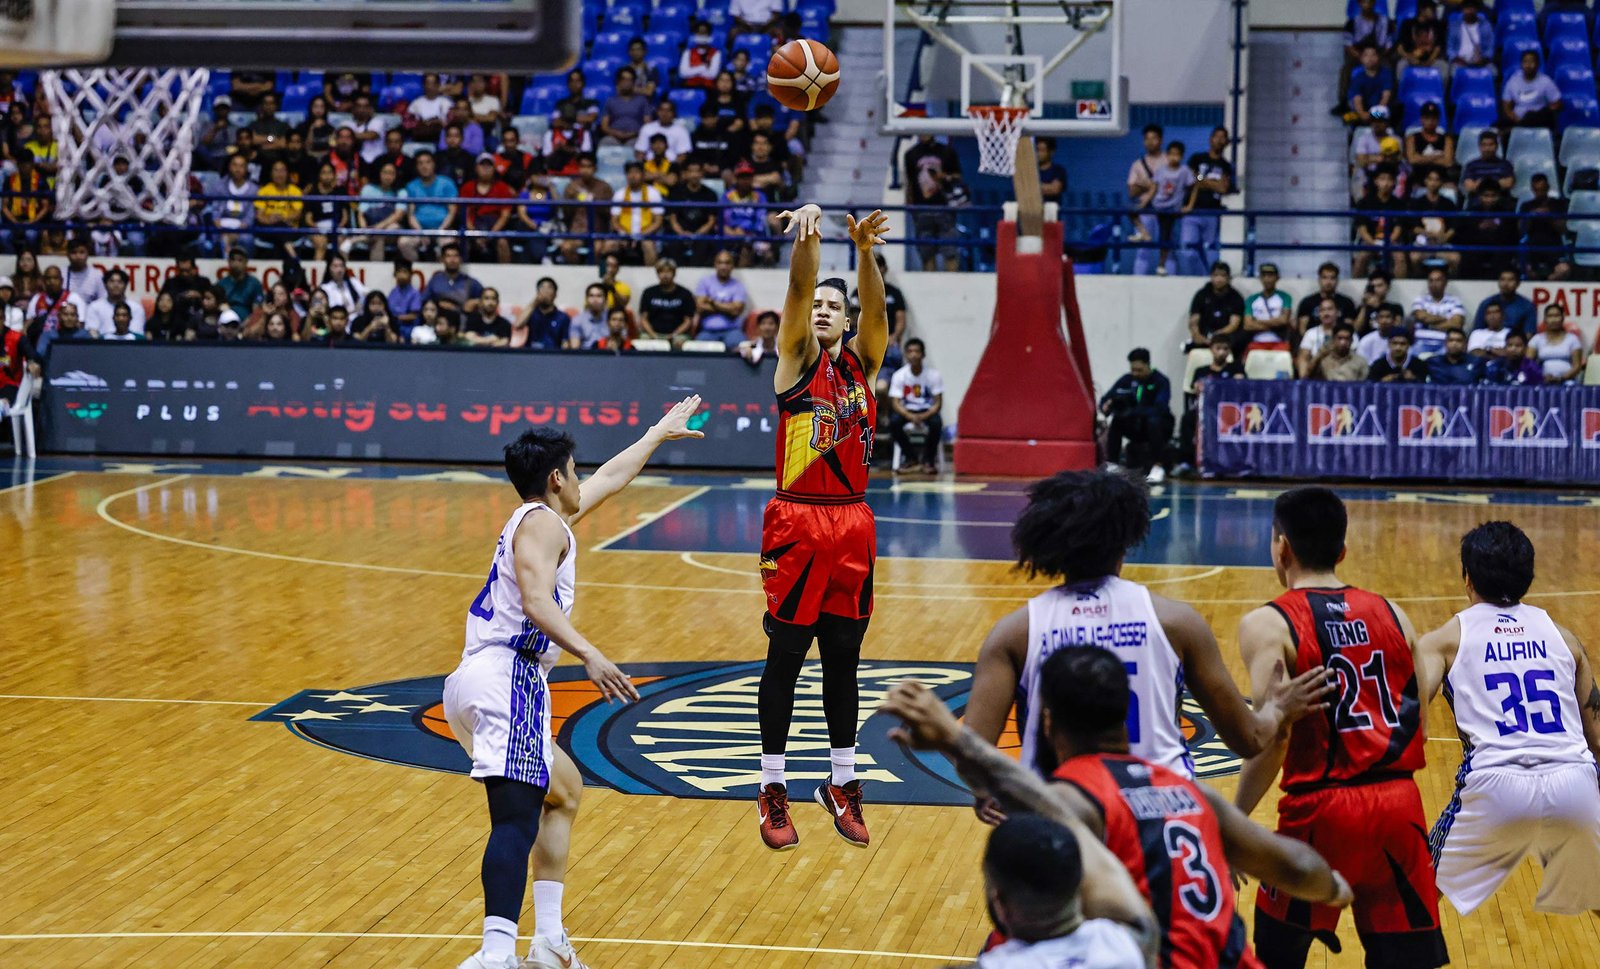 Marcio Lassiter shoots for elusive PBA All-Star 3-point title